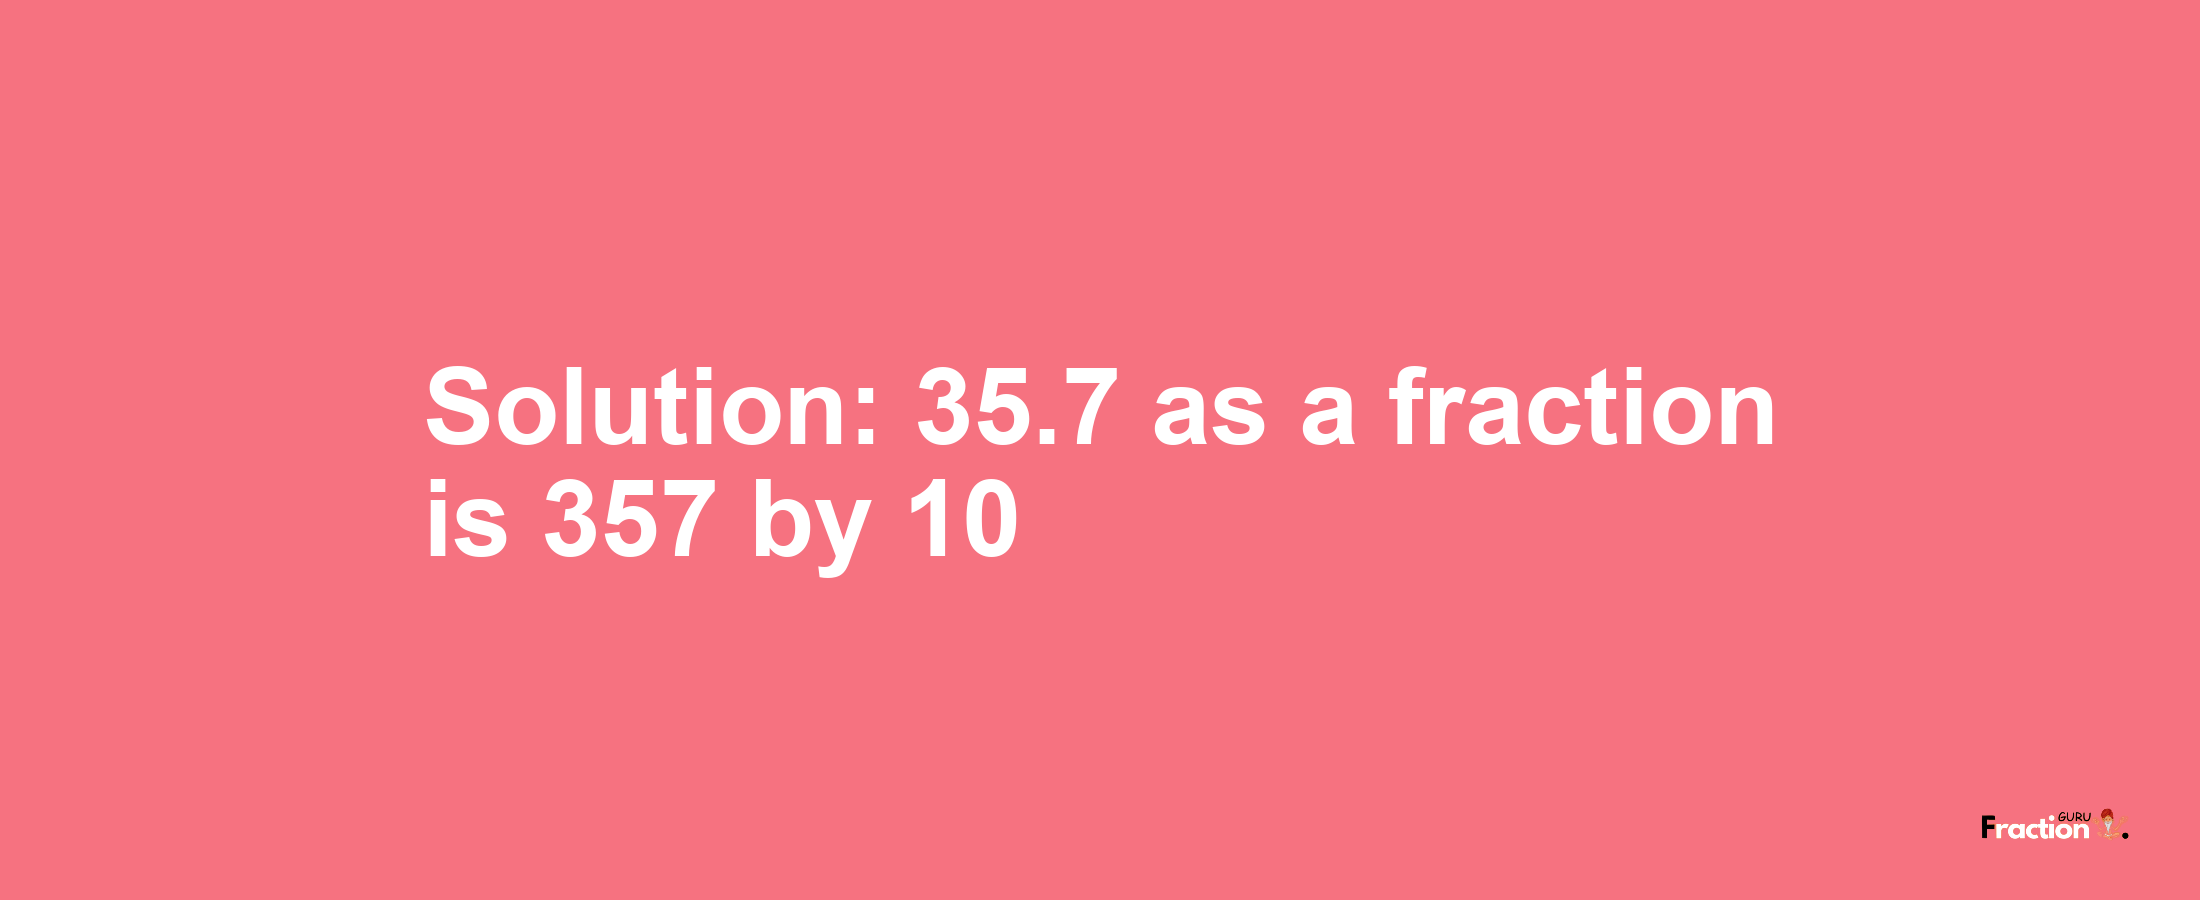 Solution:35.7 as a fraction is 357/10